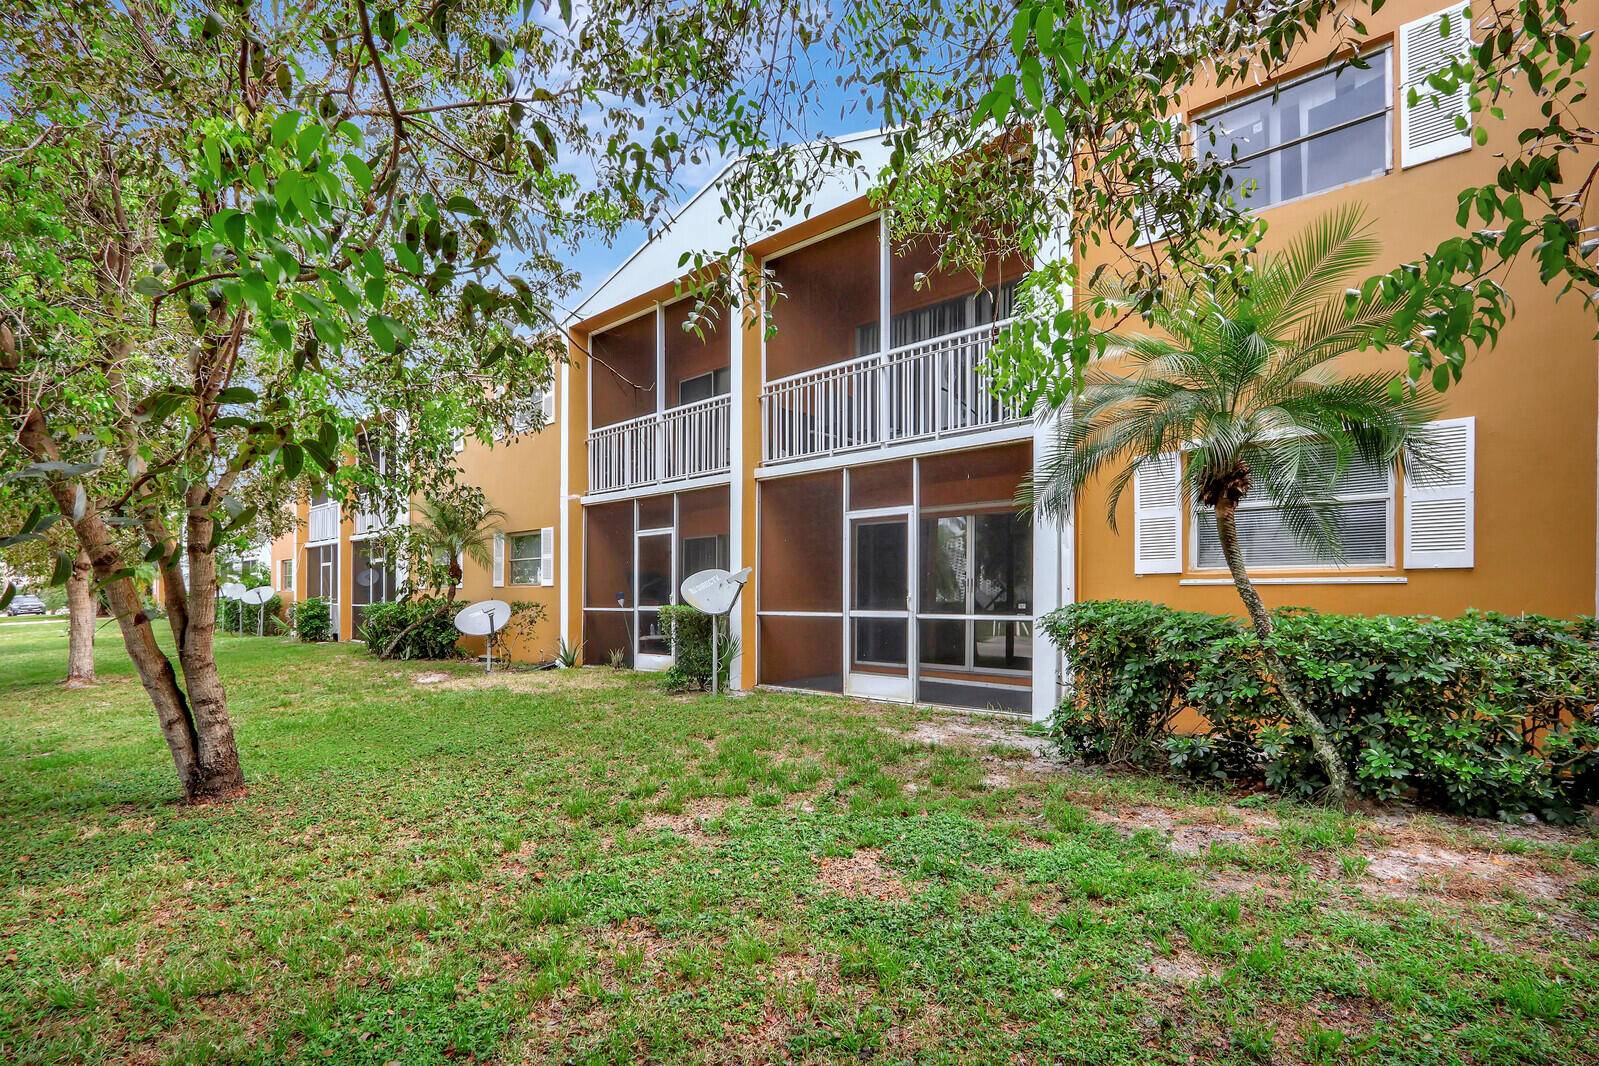 All ages welcome ! Updates have JUST BEEN COMPLETED on this ground floor condo with 2 bedrooms 1.